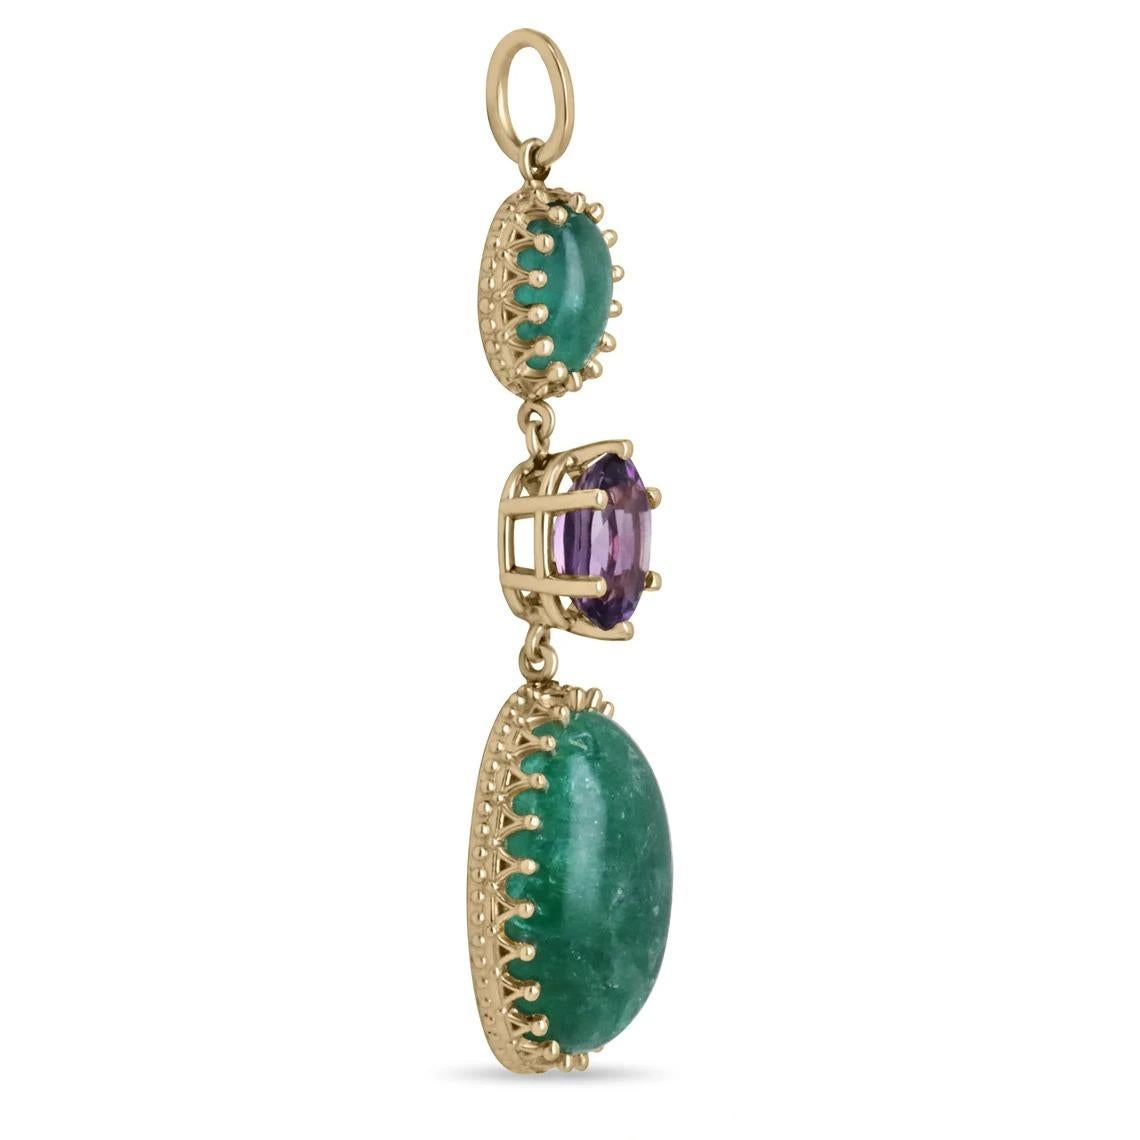 A remarkable emerald and amethyst necklace, that showcases three gorgeous gemstones. At the very top of the piece, a 1.86-carat, natural cabochon emerald. Followed by a 1.83-carat, natural oval-cut amethyst that displays the most stunning violet